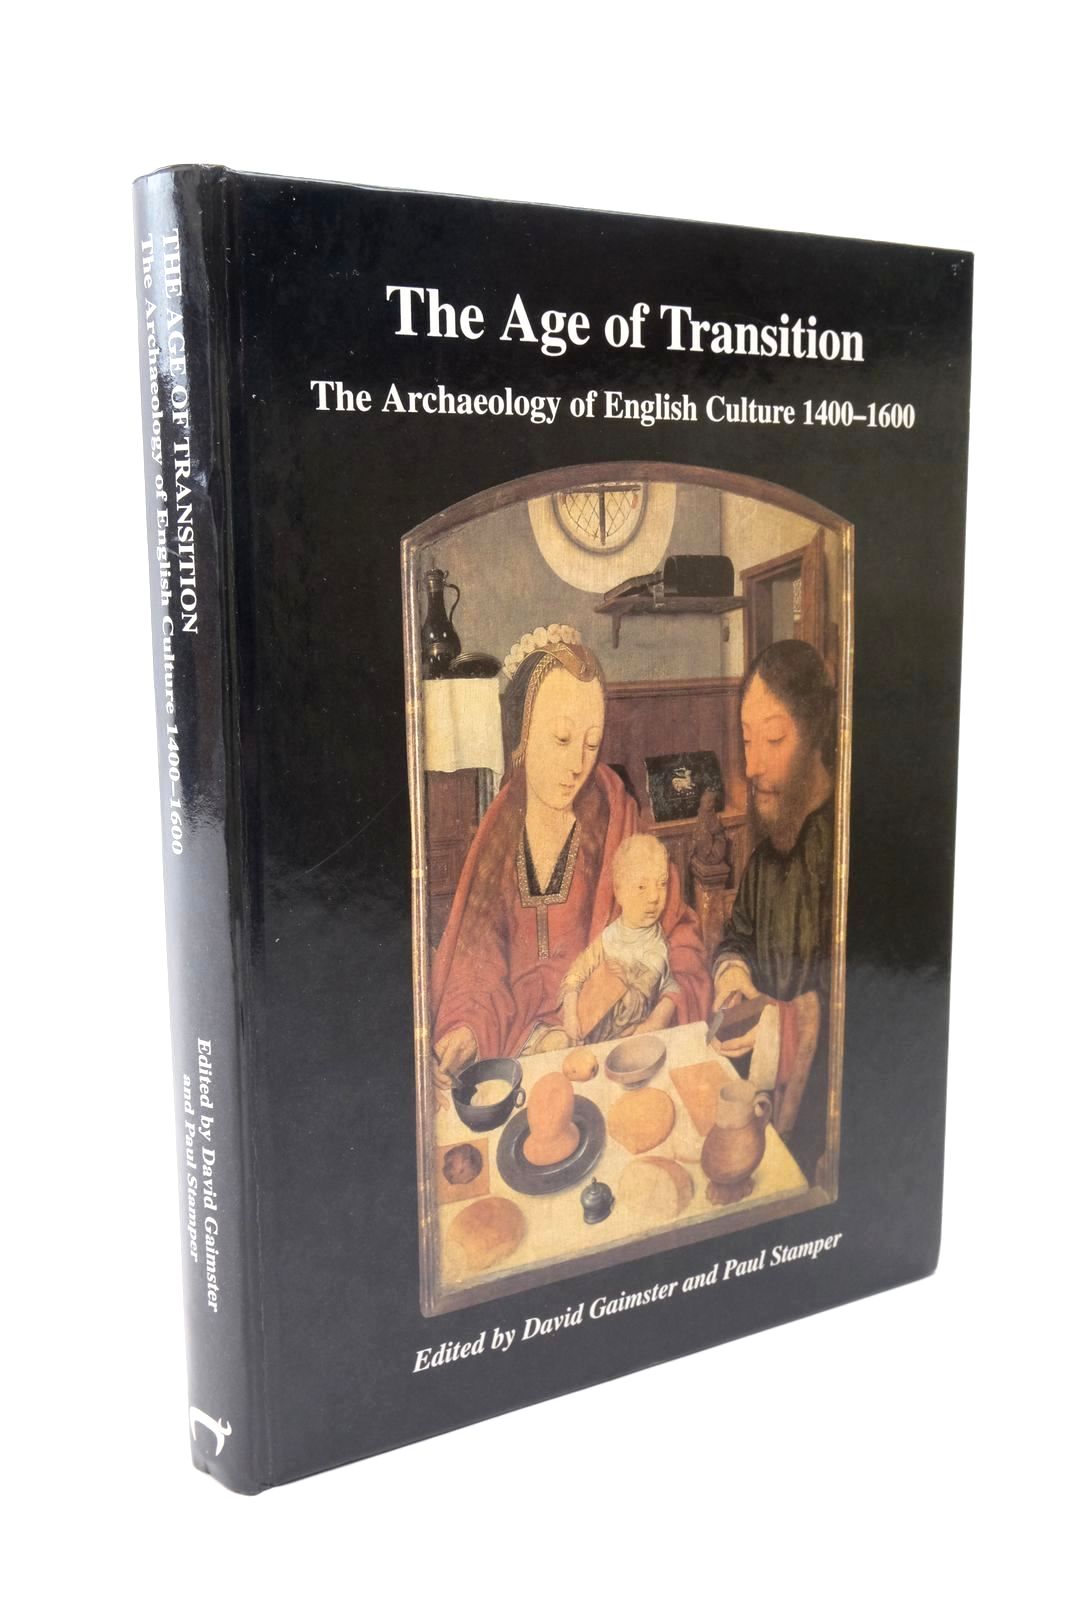 Photo of THE AGE OF TRANSITION - THE ARCHAEOLOGY OF ENGLISH CULTURE 1400-1600 written by Gaimster, David Stamper, Paul published by Oxbow Books (STOCK CODE: 1322490)  for sale by Stella & Rose's Books